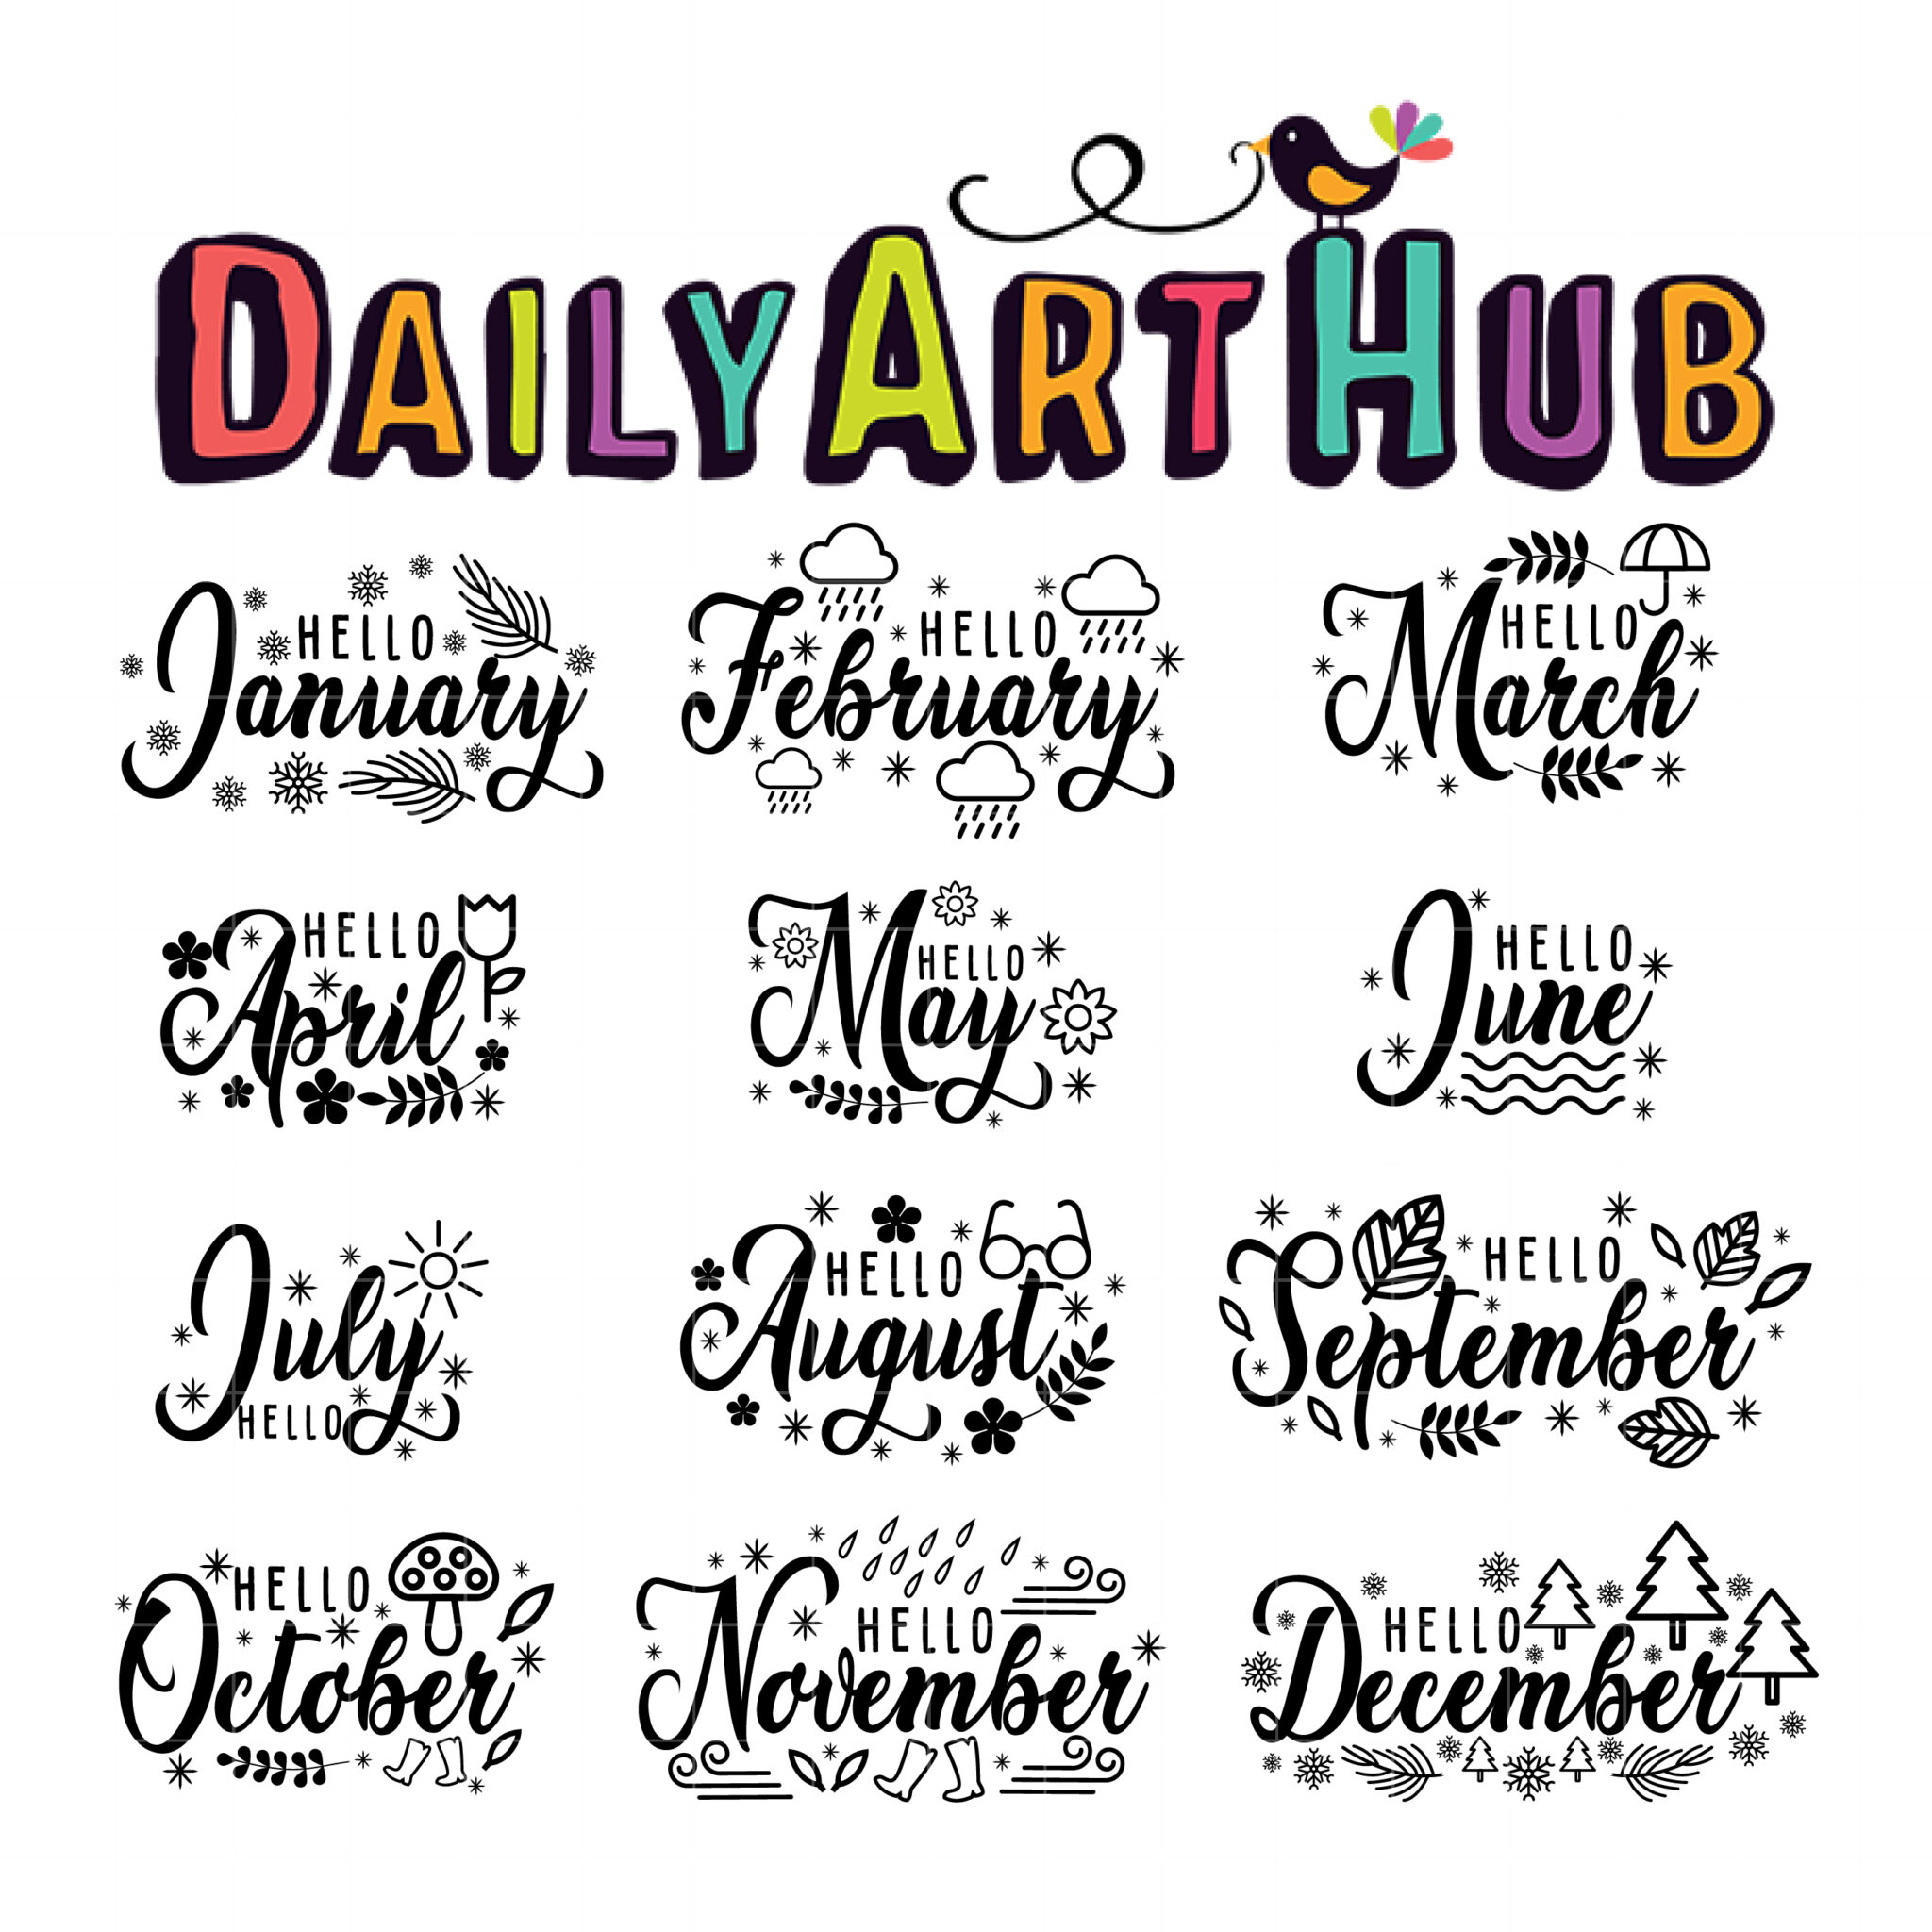 https://www.dailyarthub.com/wp-content/uploads/2020/04/Doodle-Monthly-Calendar-scaled.jpg